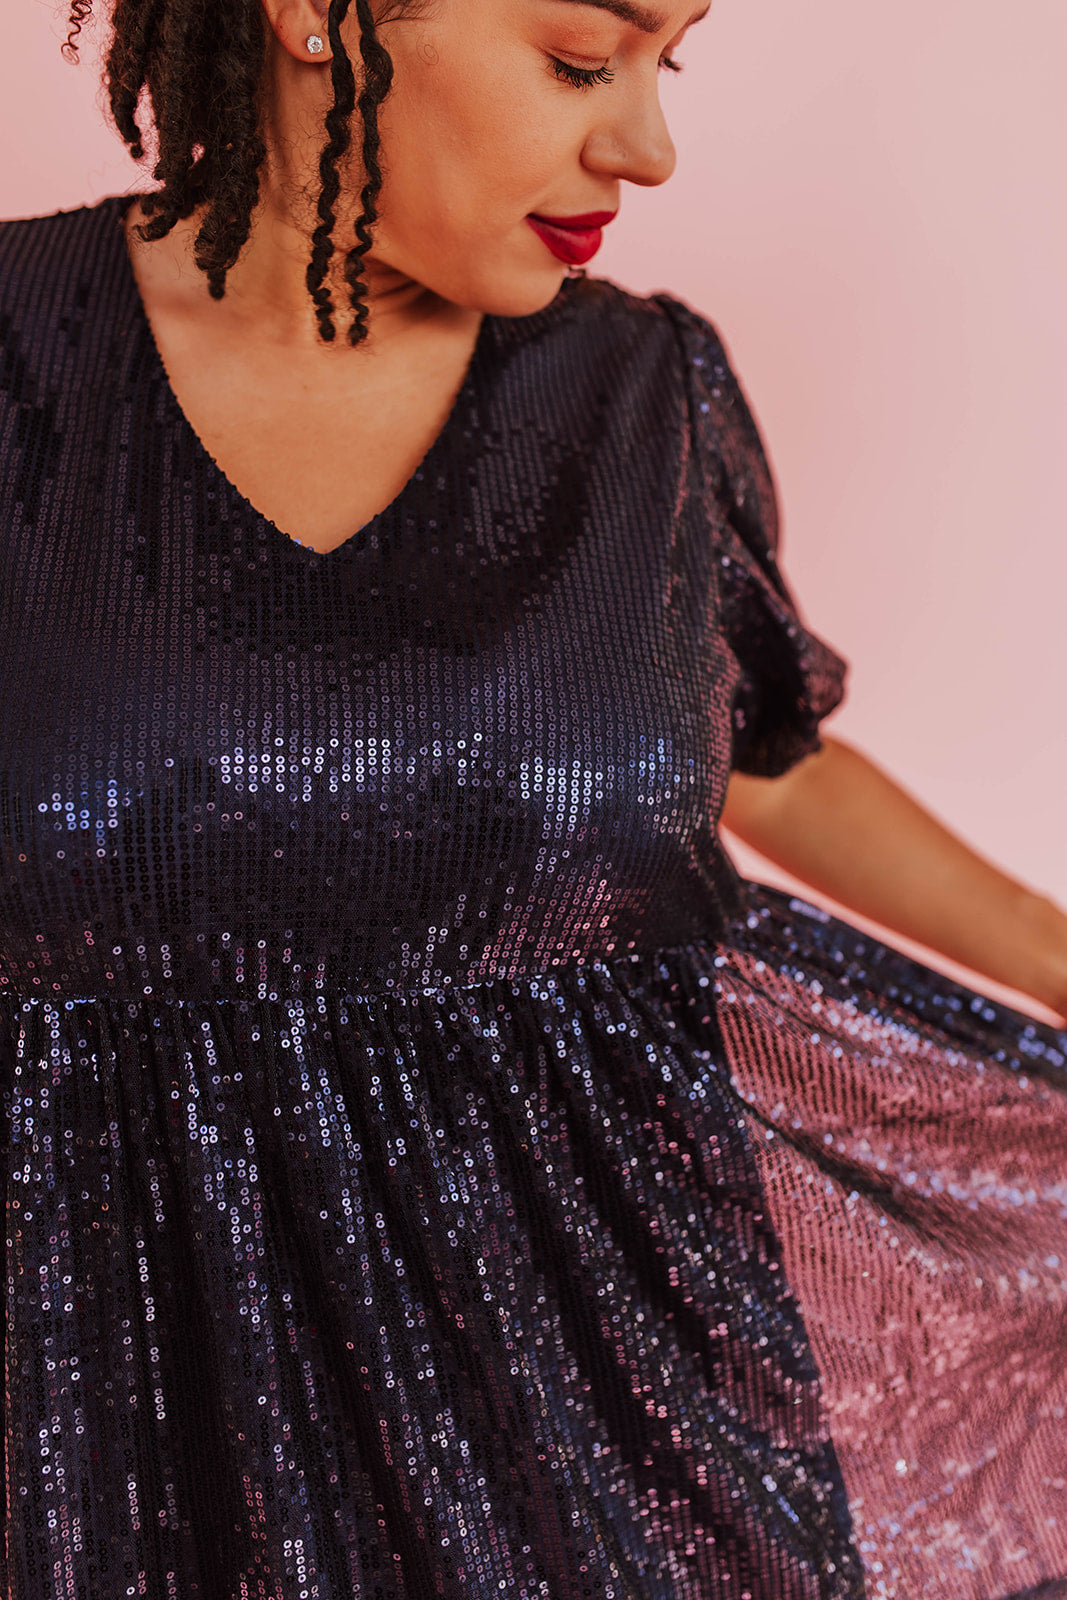 ALL THAT SHIMMERS SEQUIN DRESS IN NAVY BY PINK DESERT